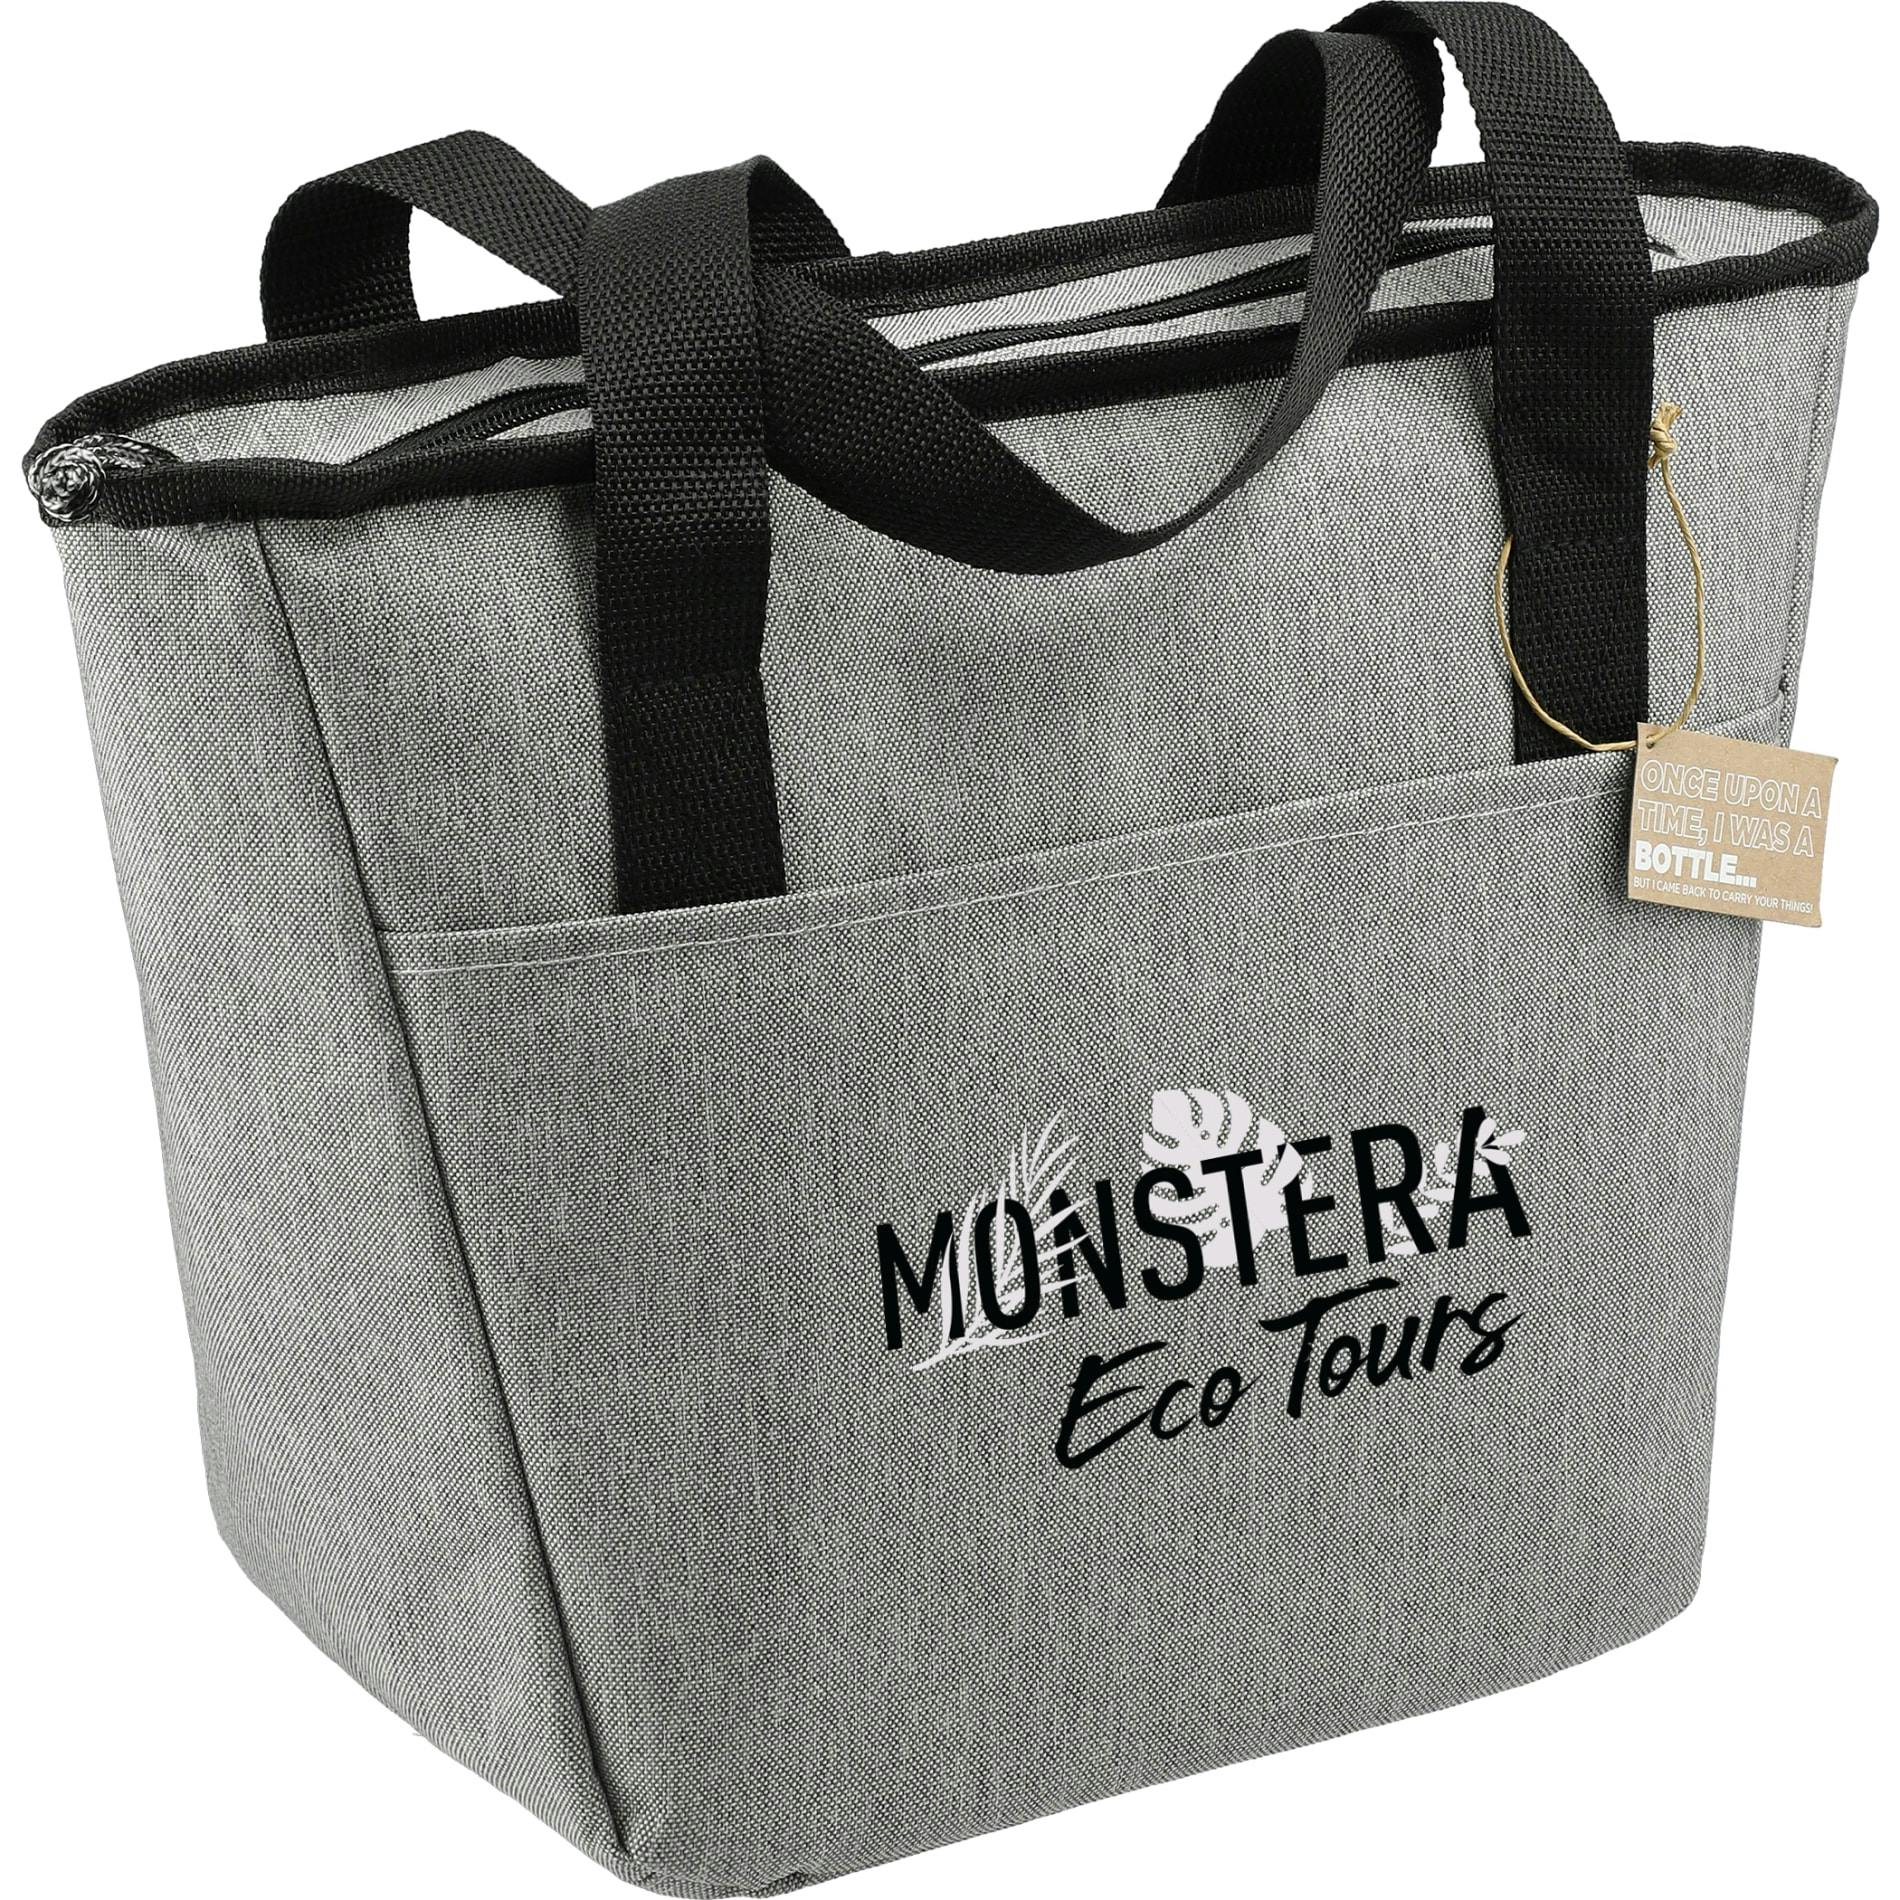 Merchant & Craft Revive Recycled 9 Can Tote Cooler - additional Image 2